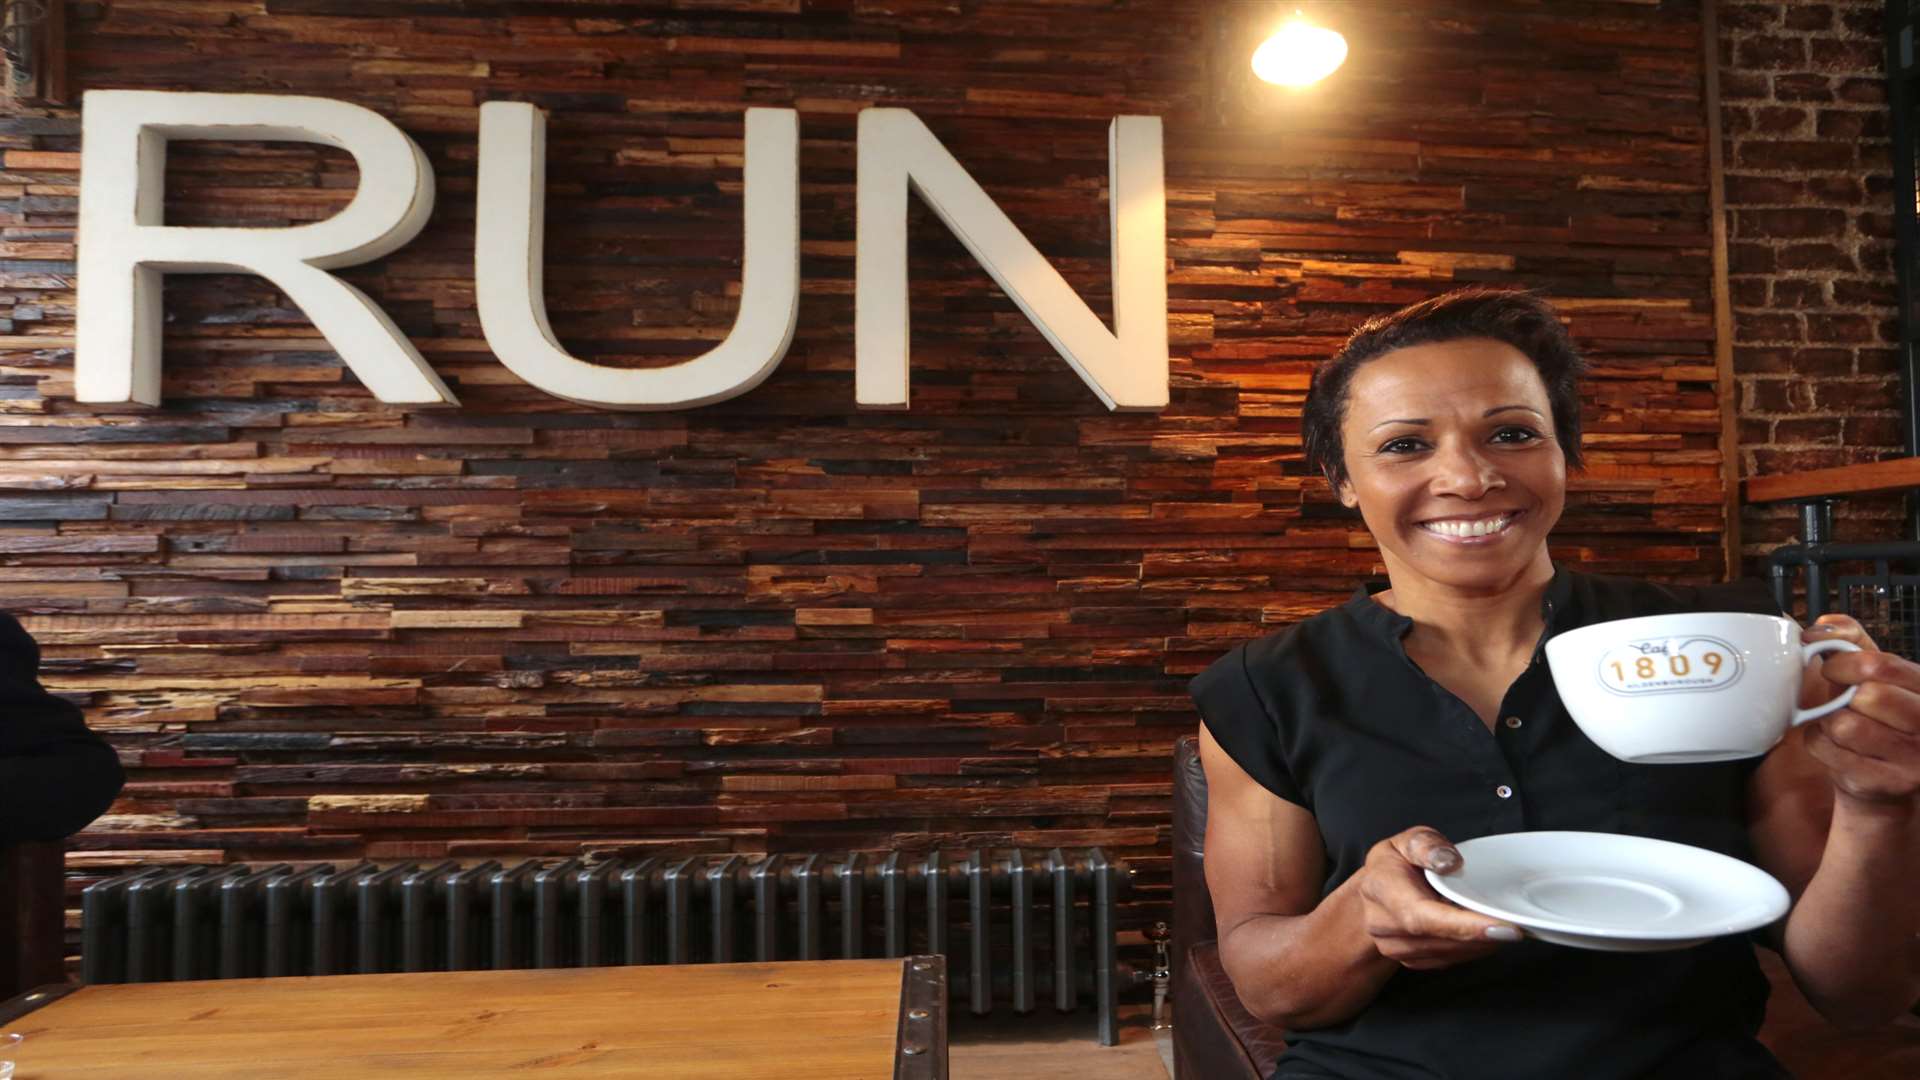 Dame Kelly Holmes at Café 1809 in Hildenborough. Picture: Martin Apps